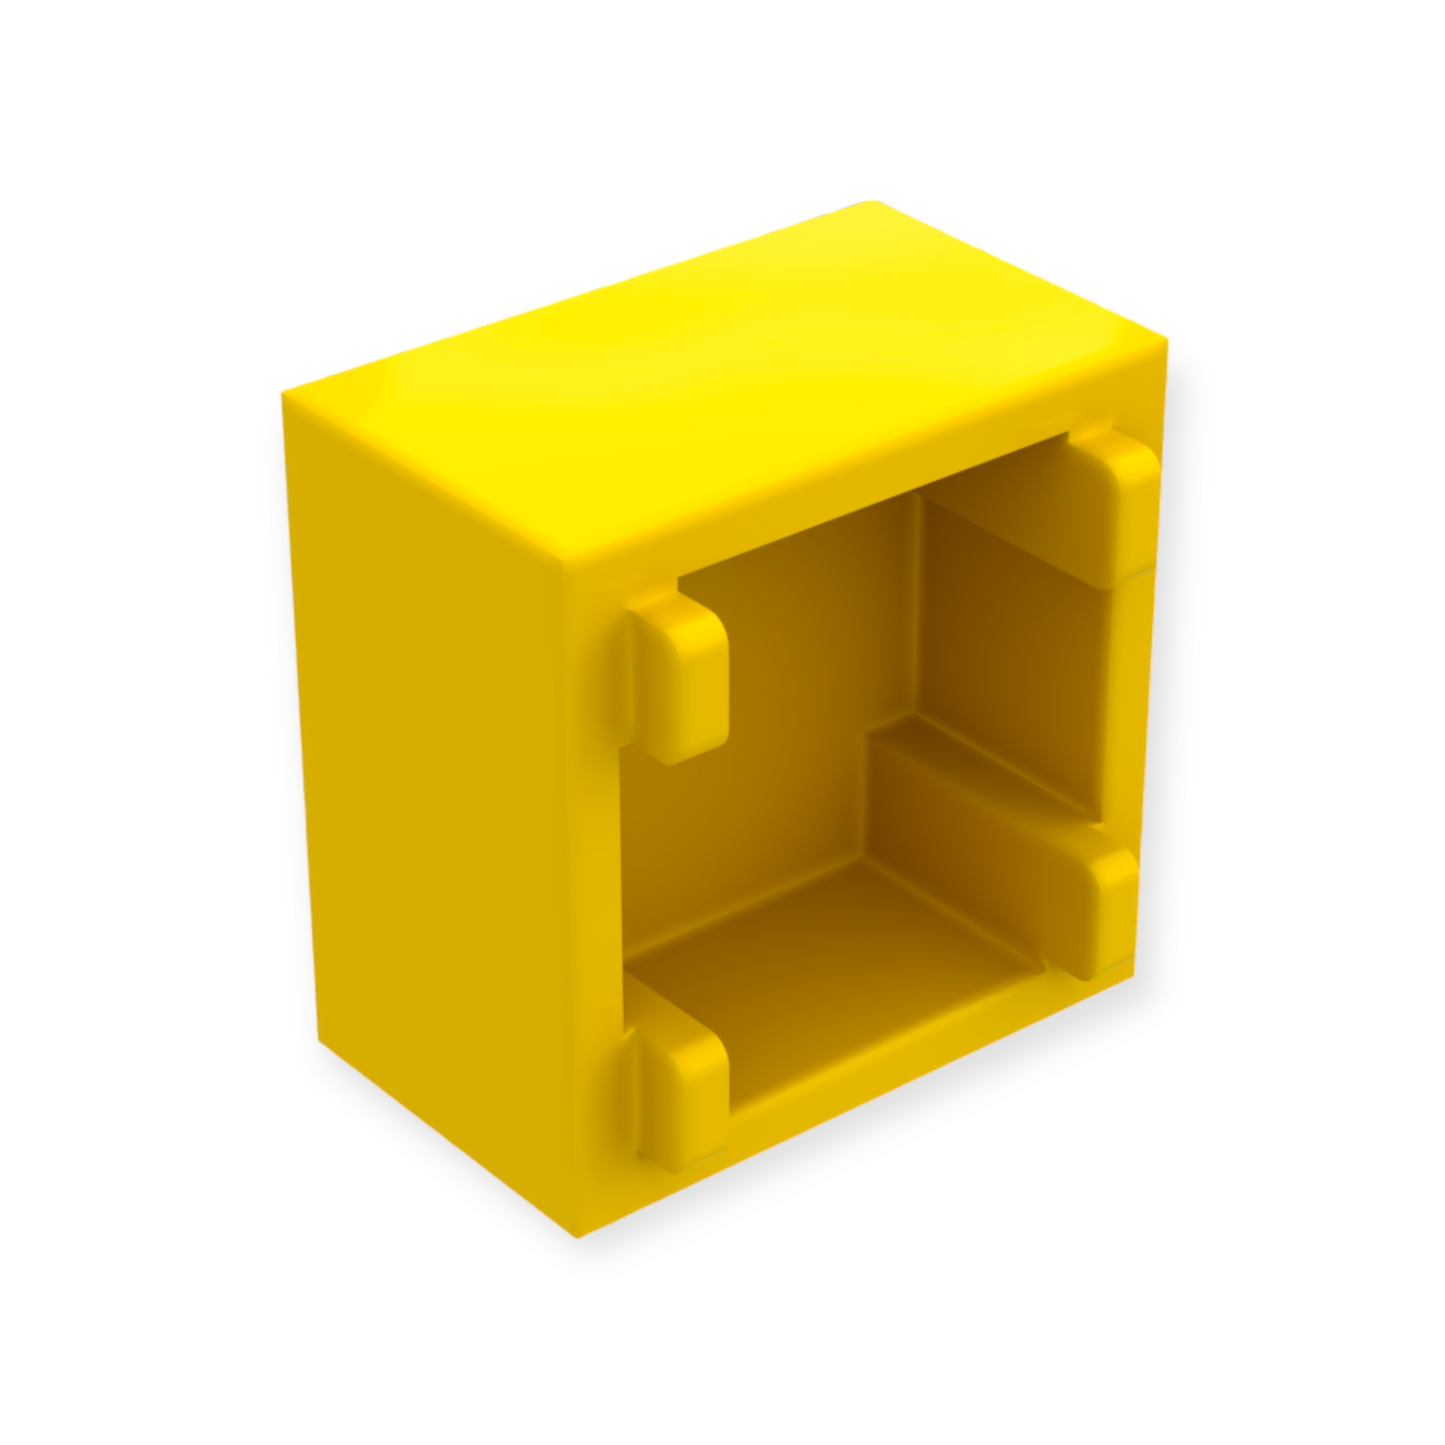 LEGO Container Box 2x2x1 - Yelllow